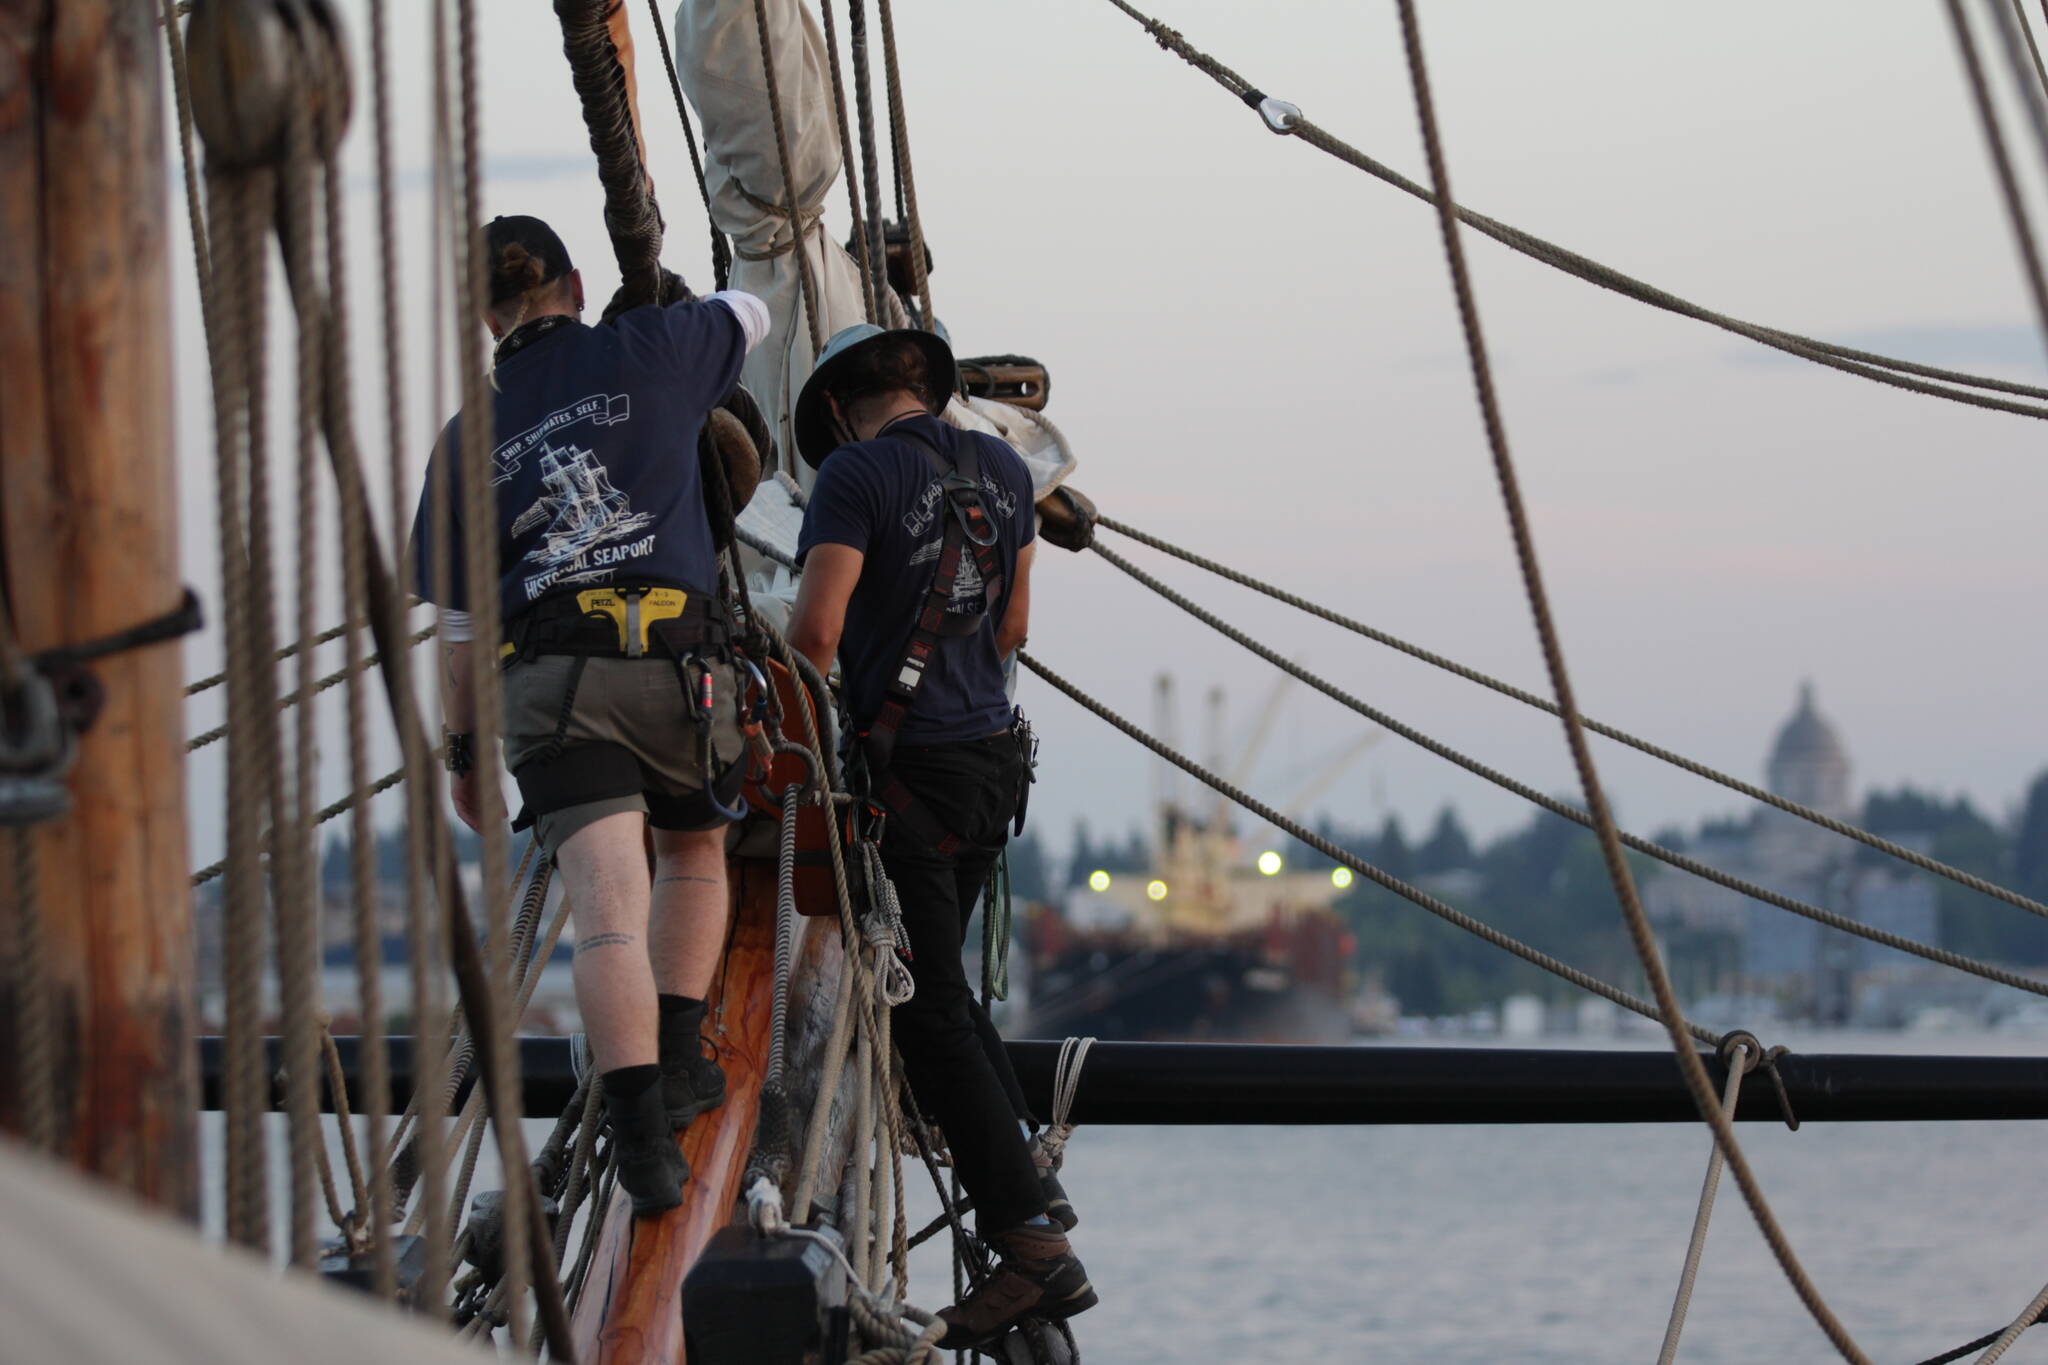 Sailors aboard the Lady Washington bring in sails as the ship heads in to port in Olympia on September 2. (Michael S. Lockett / The Daily World)